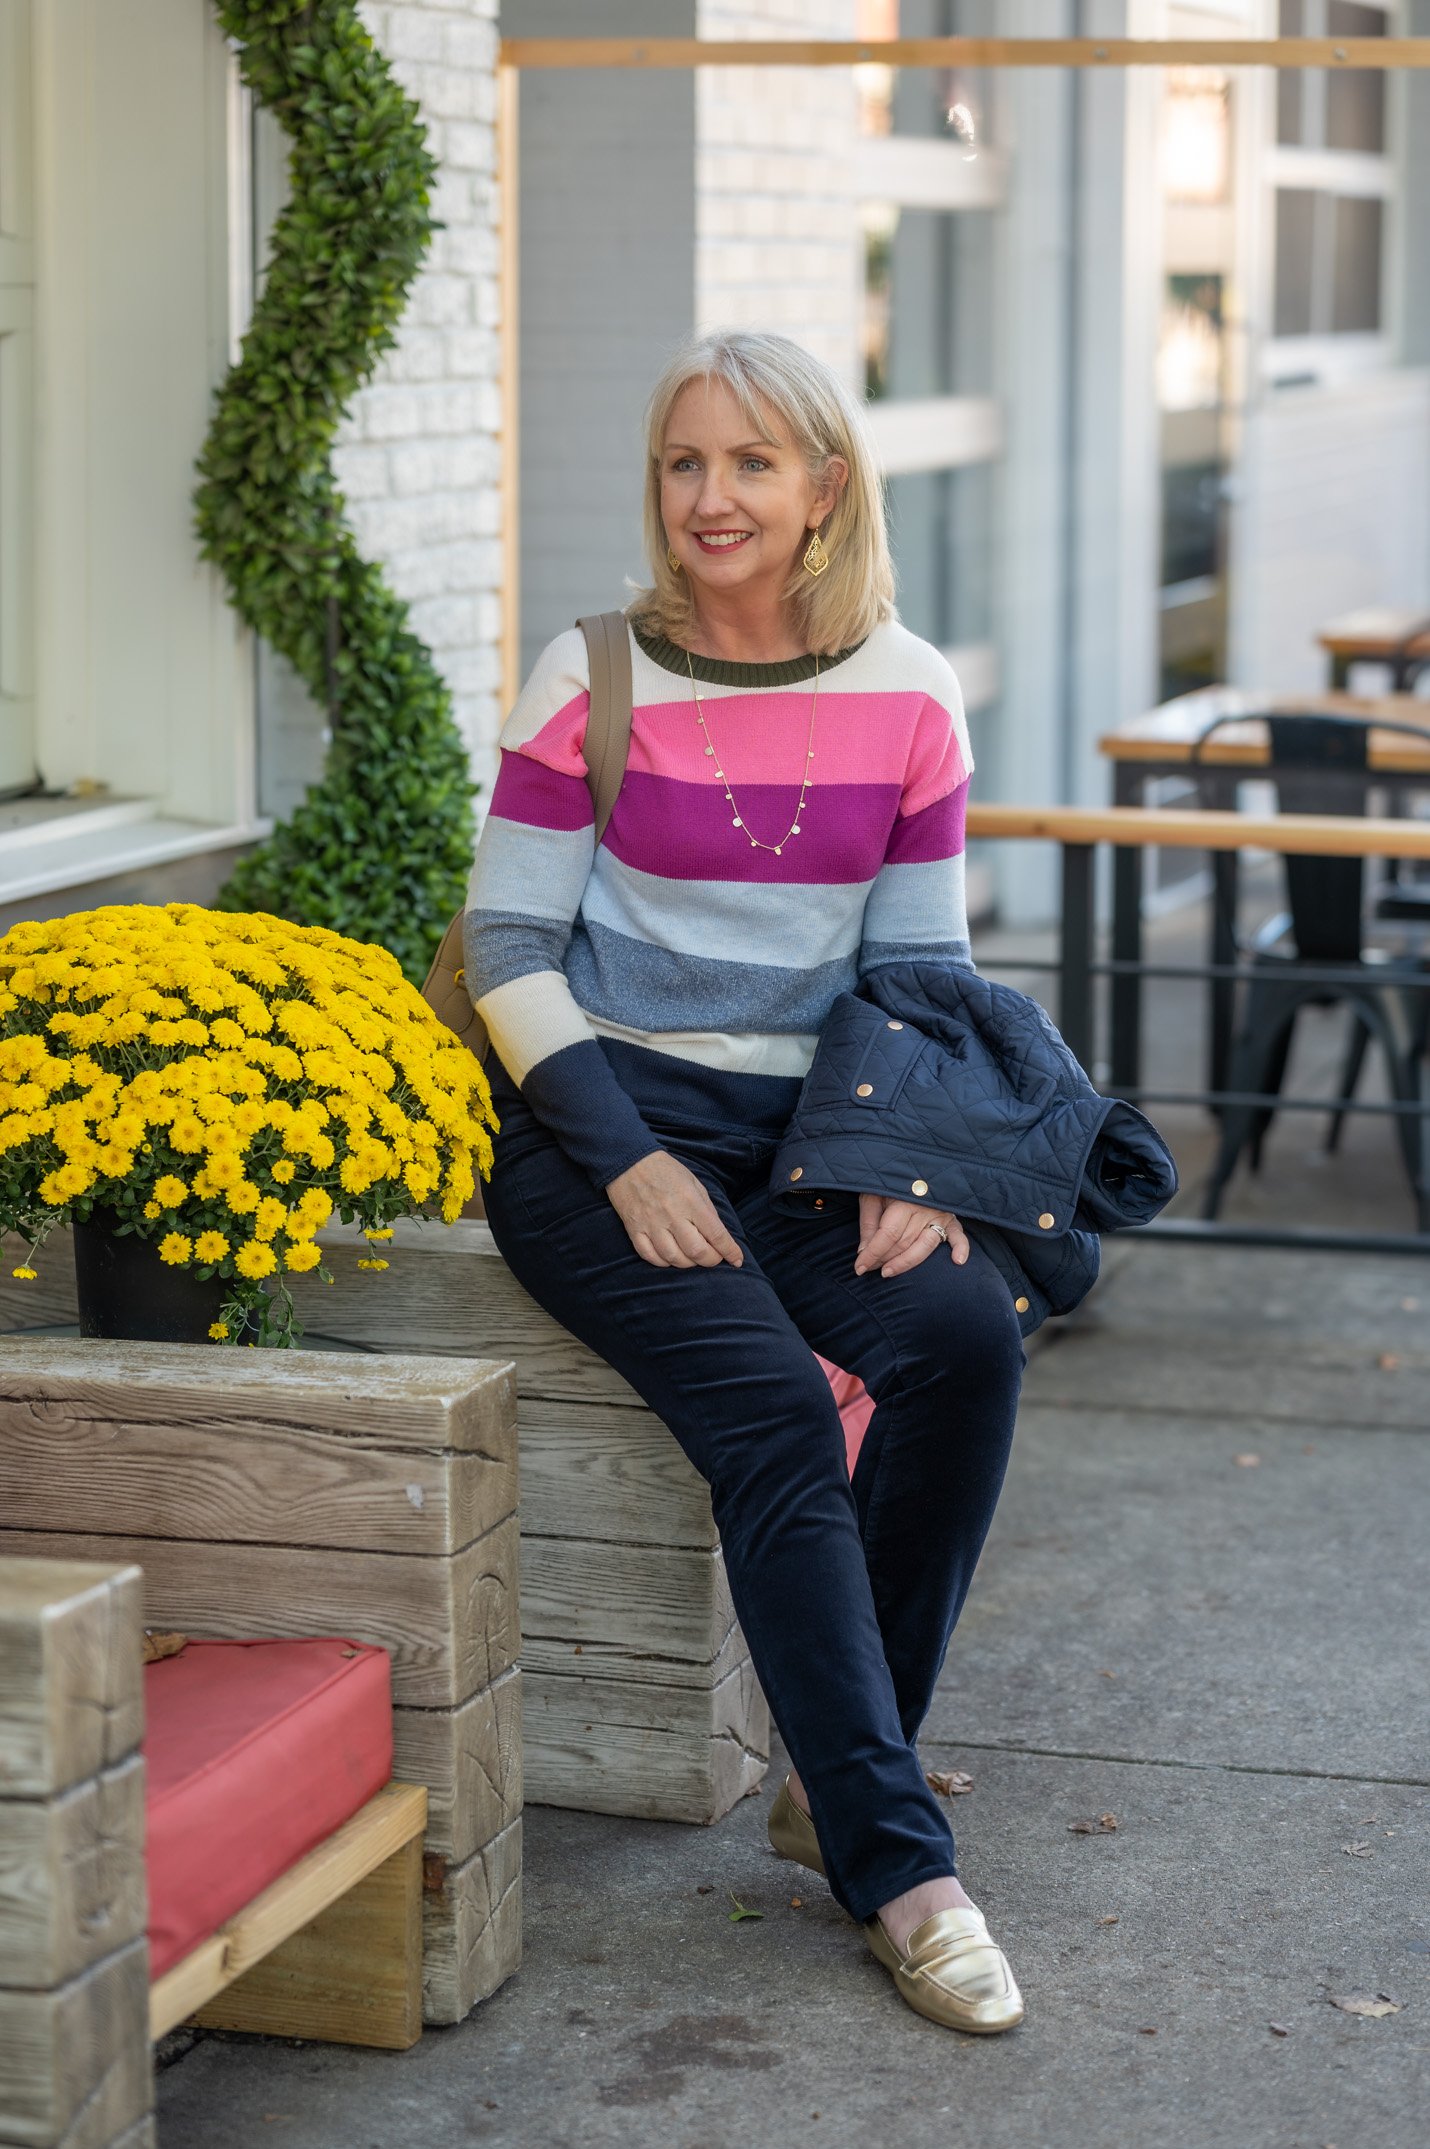 Fun Fall Outfit for Women Over 50